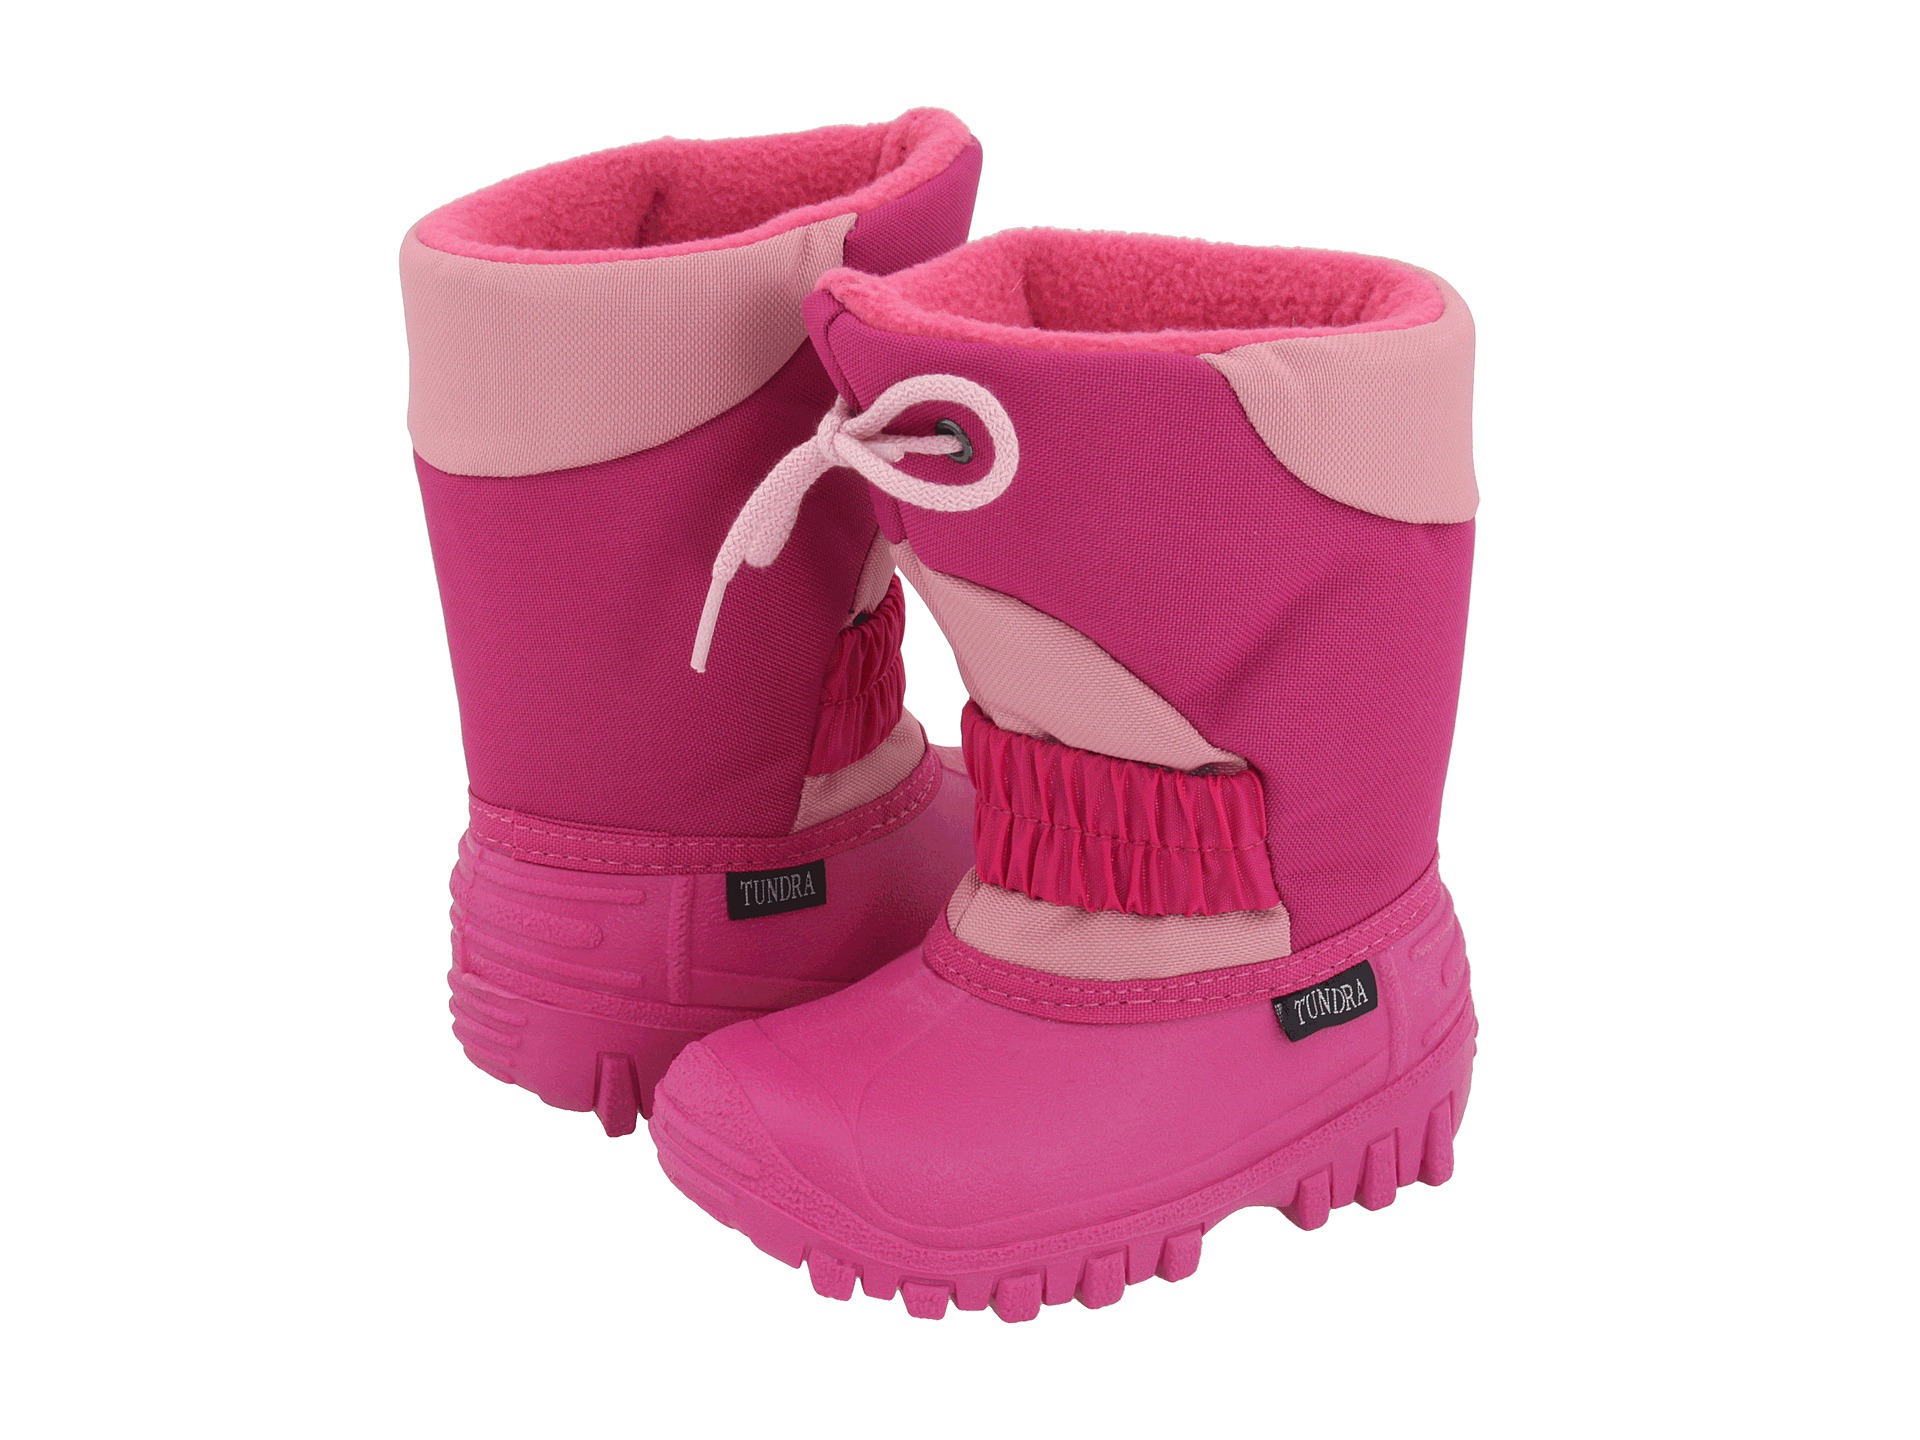 Tundra Kids Boots Outback (Infant/Toddler/Youth) $34.99 $43.50 Rated 